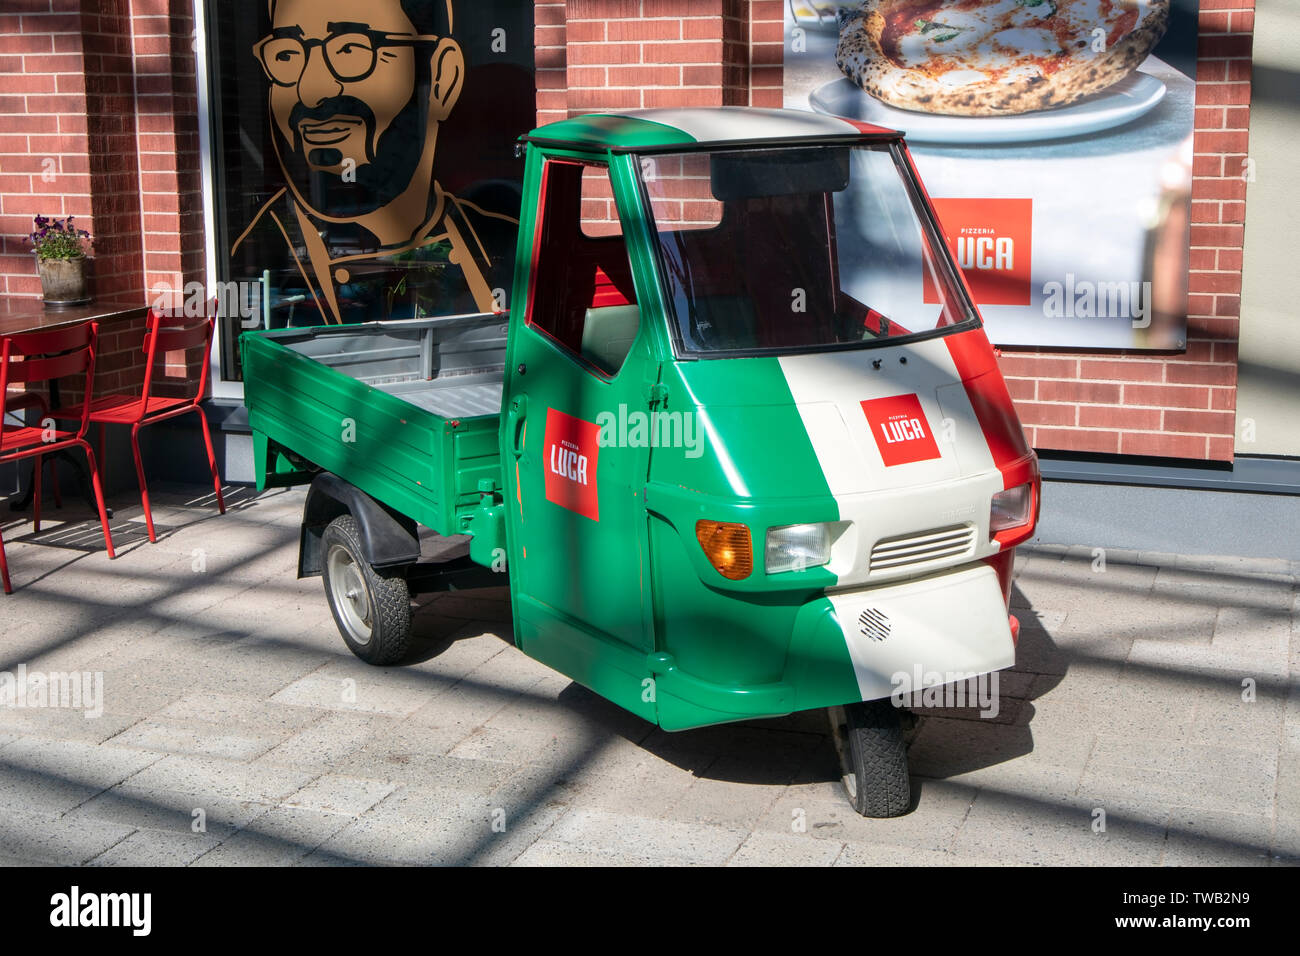 Piaggio Ape vehicle in front of Pizzeria Luca in Zsar Outlet Village in Vaalimaa, Finland Stock Photo